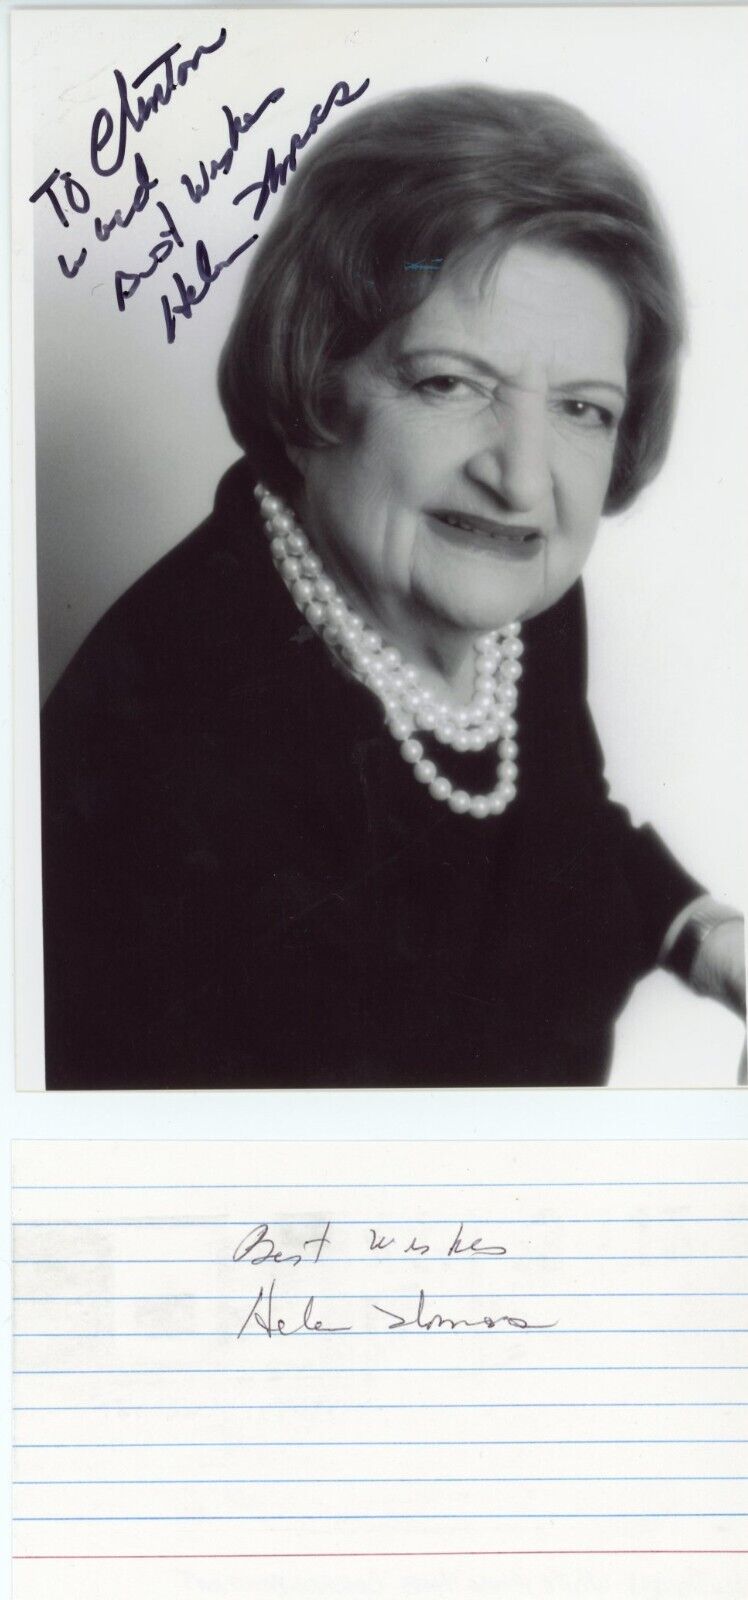 Helen Thomas Hand Signed Photograph + Autographed Notecard